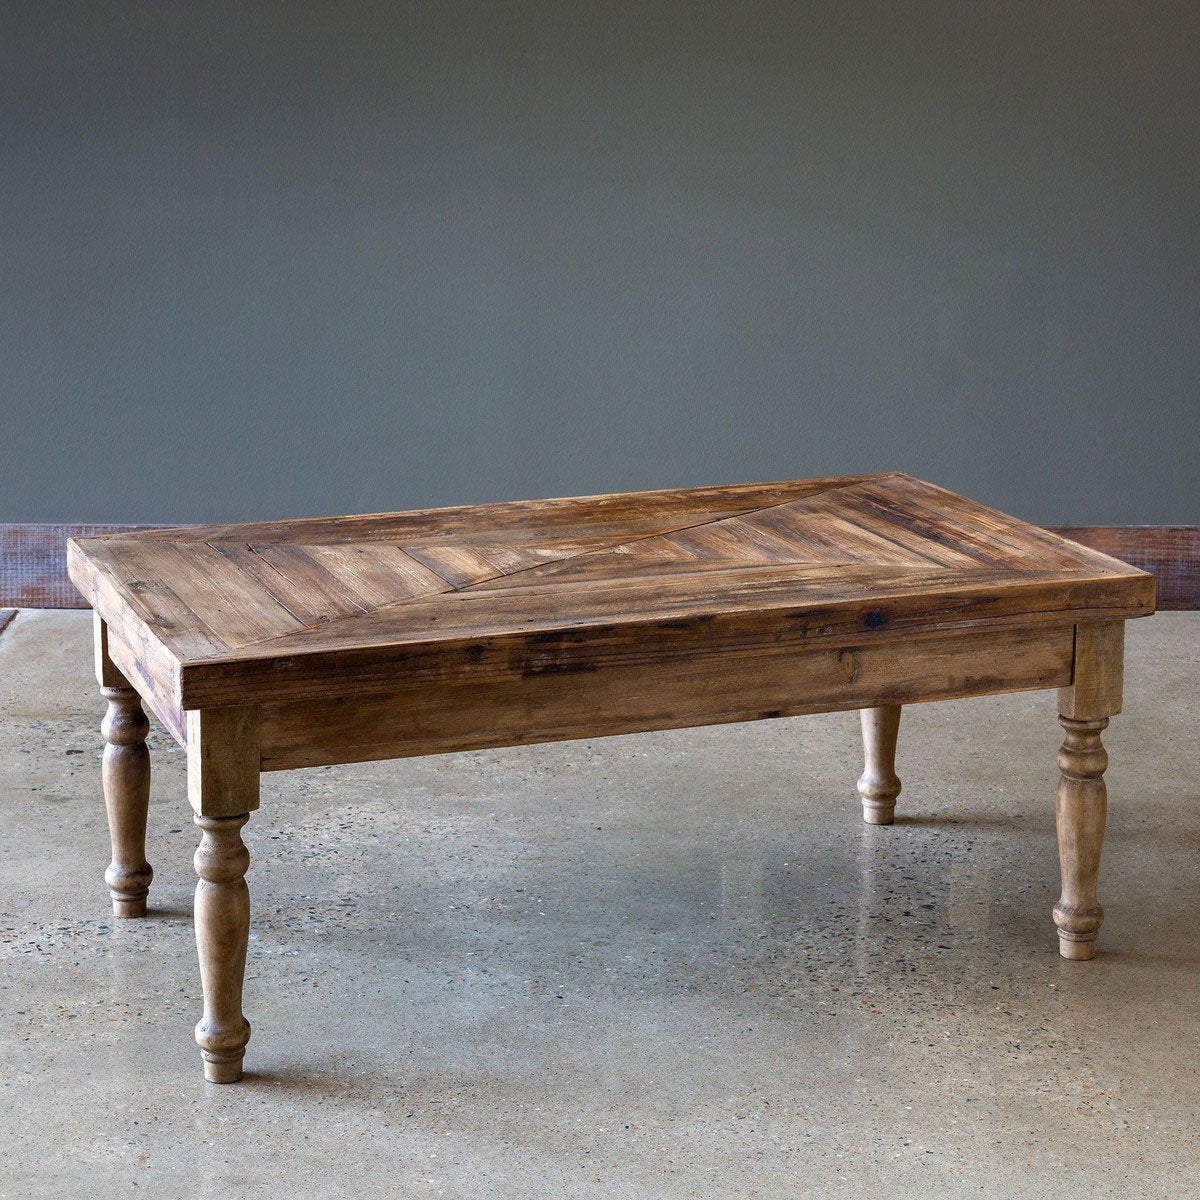 Reclaimed Wood Coffee Table Iron Accents